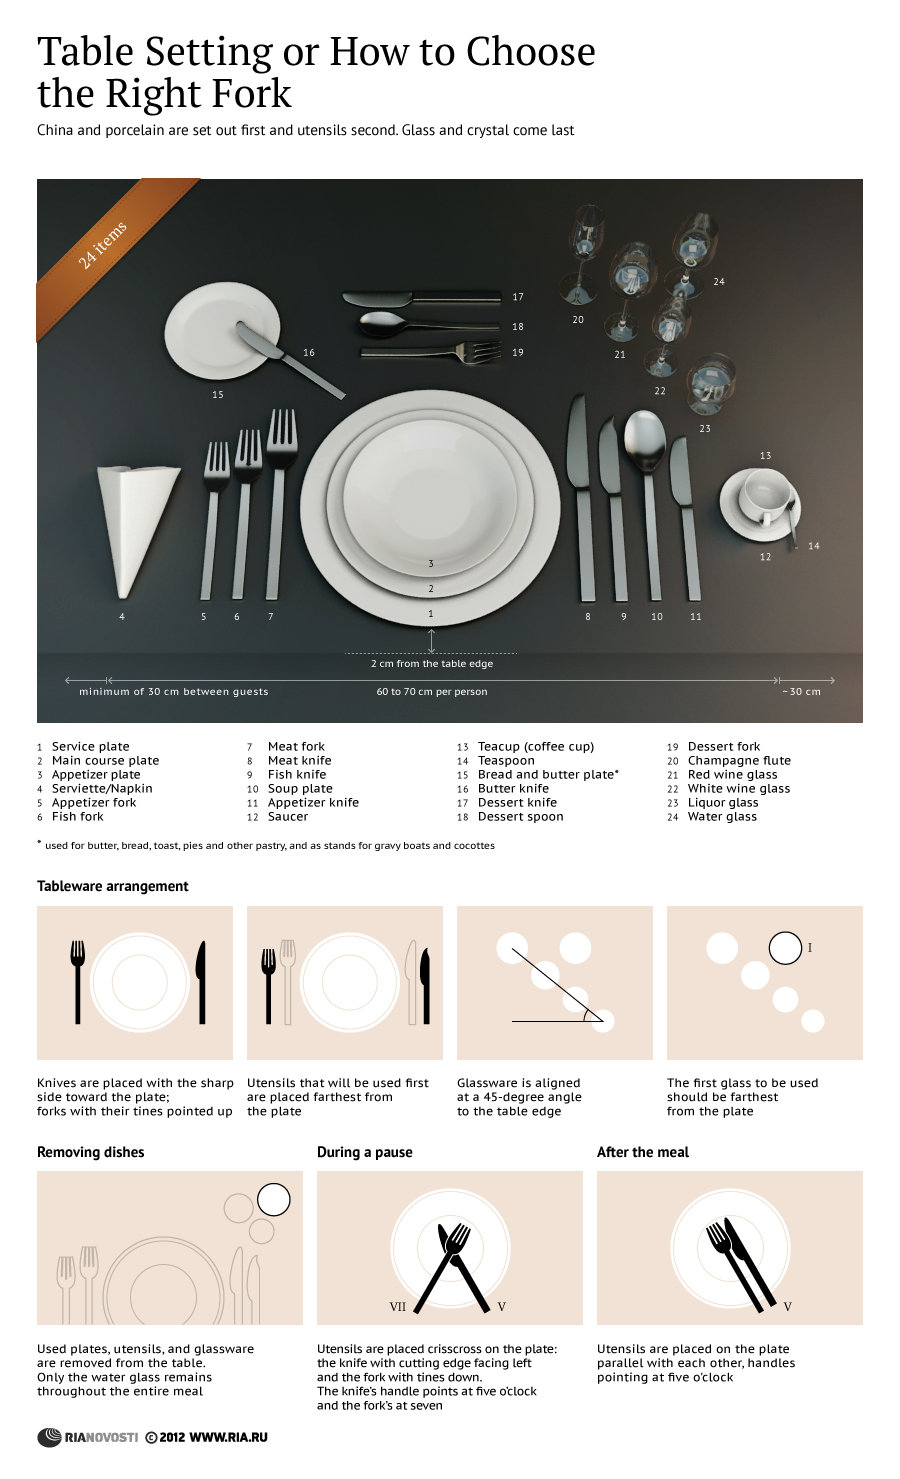 Table Setting or How to Choose the Right Fork - Sputnik International